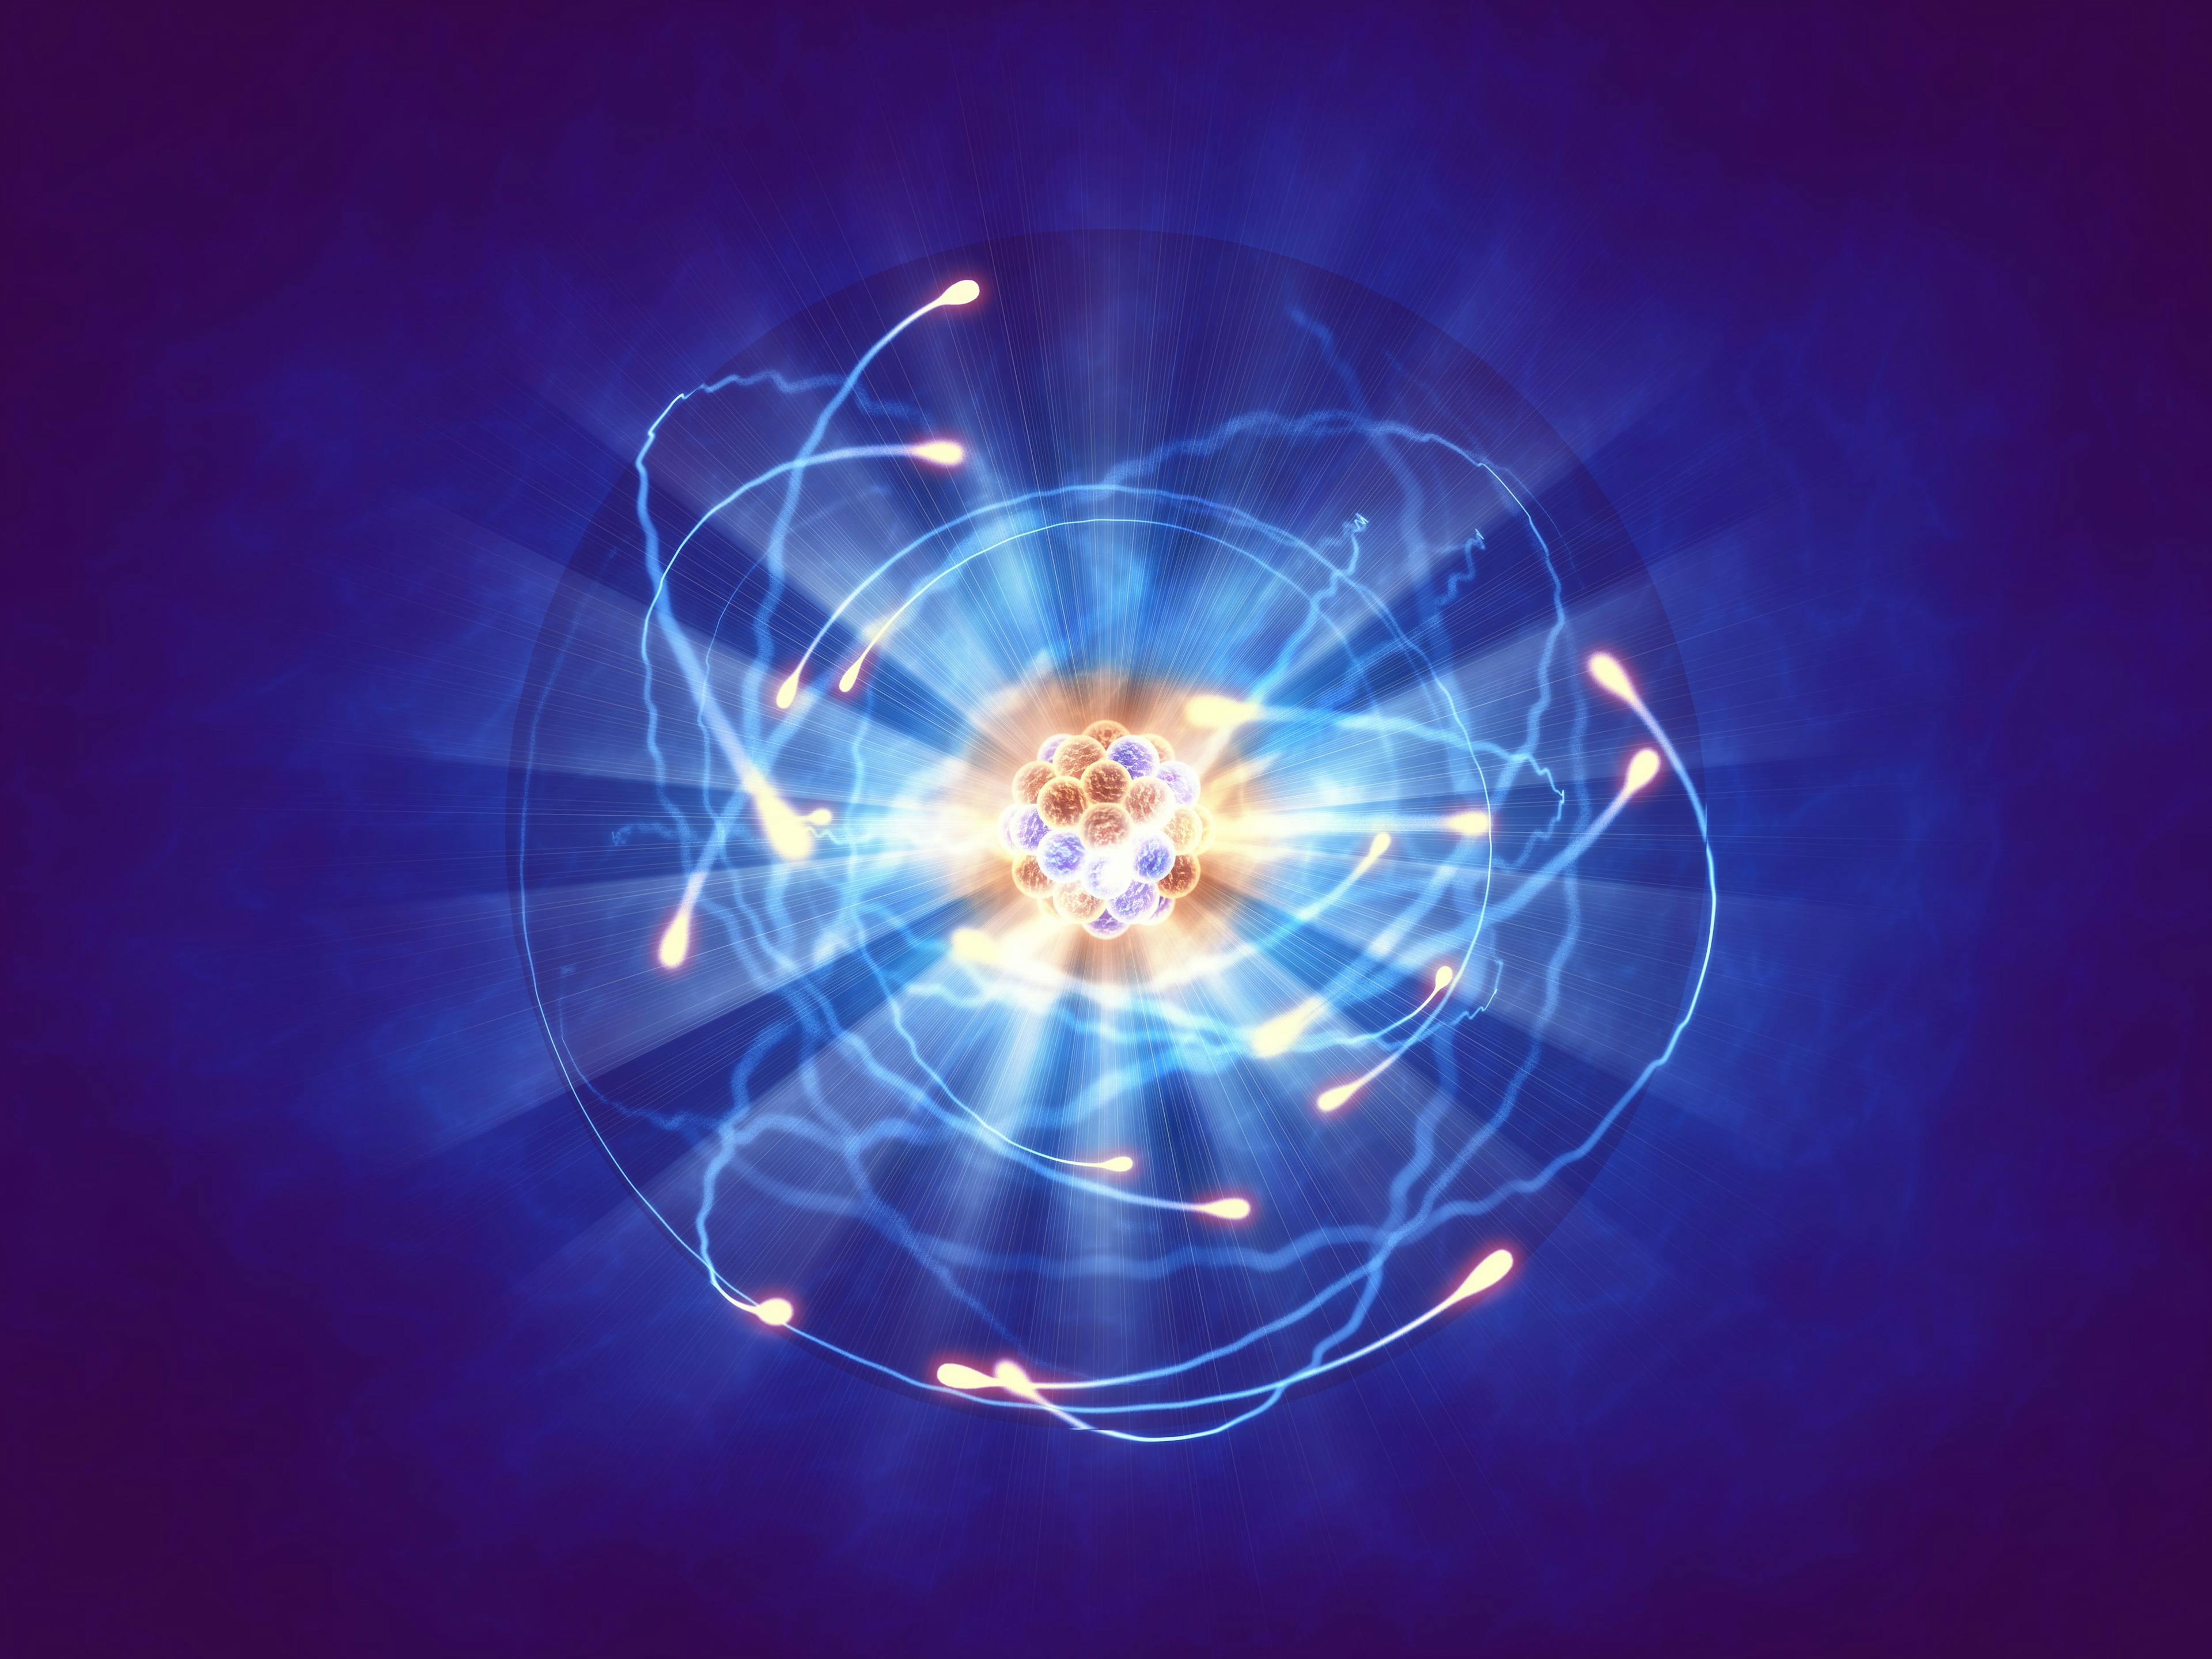 Single atom and its electron cloud , Quantum mechanics and atomic structure concept | Image Credit: © nobeastsofierce - stock.adobe.com